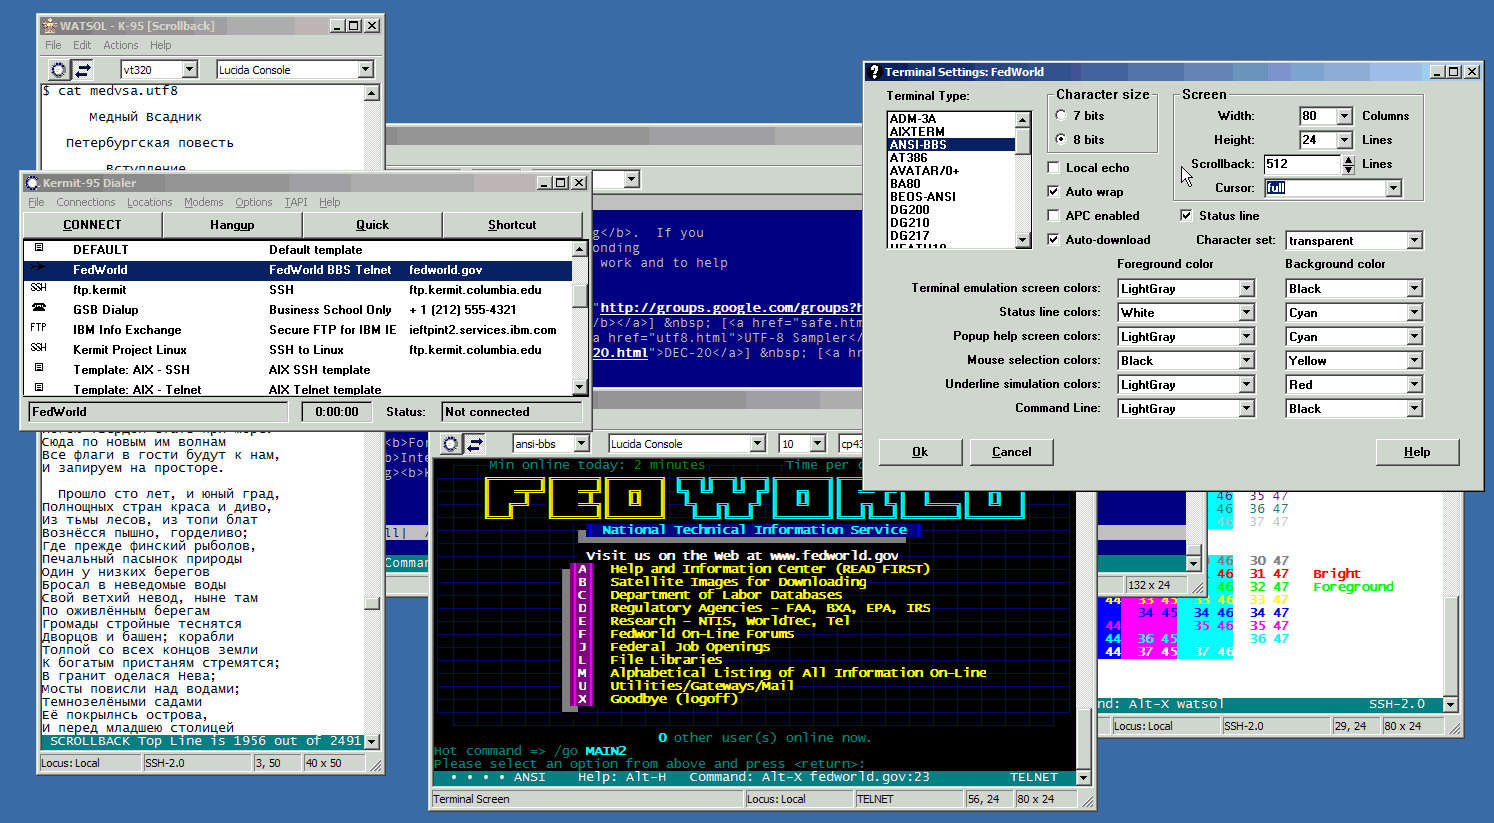 A portion of a typical Windows desktop showing the Kermit 95 2.0 Dialer and one of its Settings pages, along with several active K95 terminal sessions.